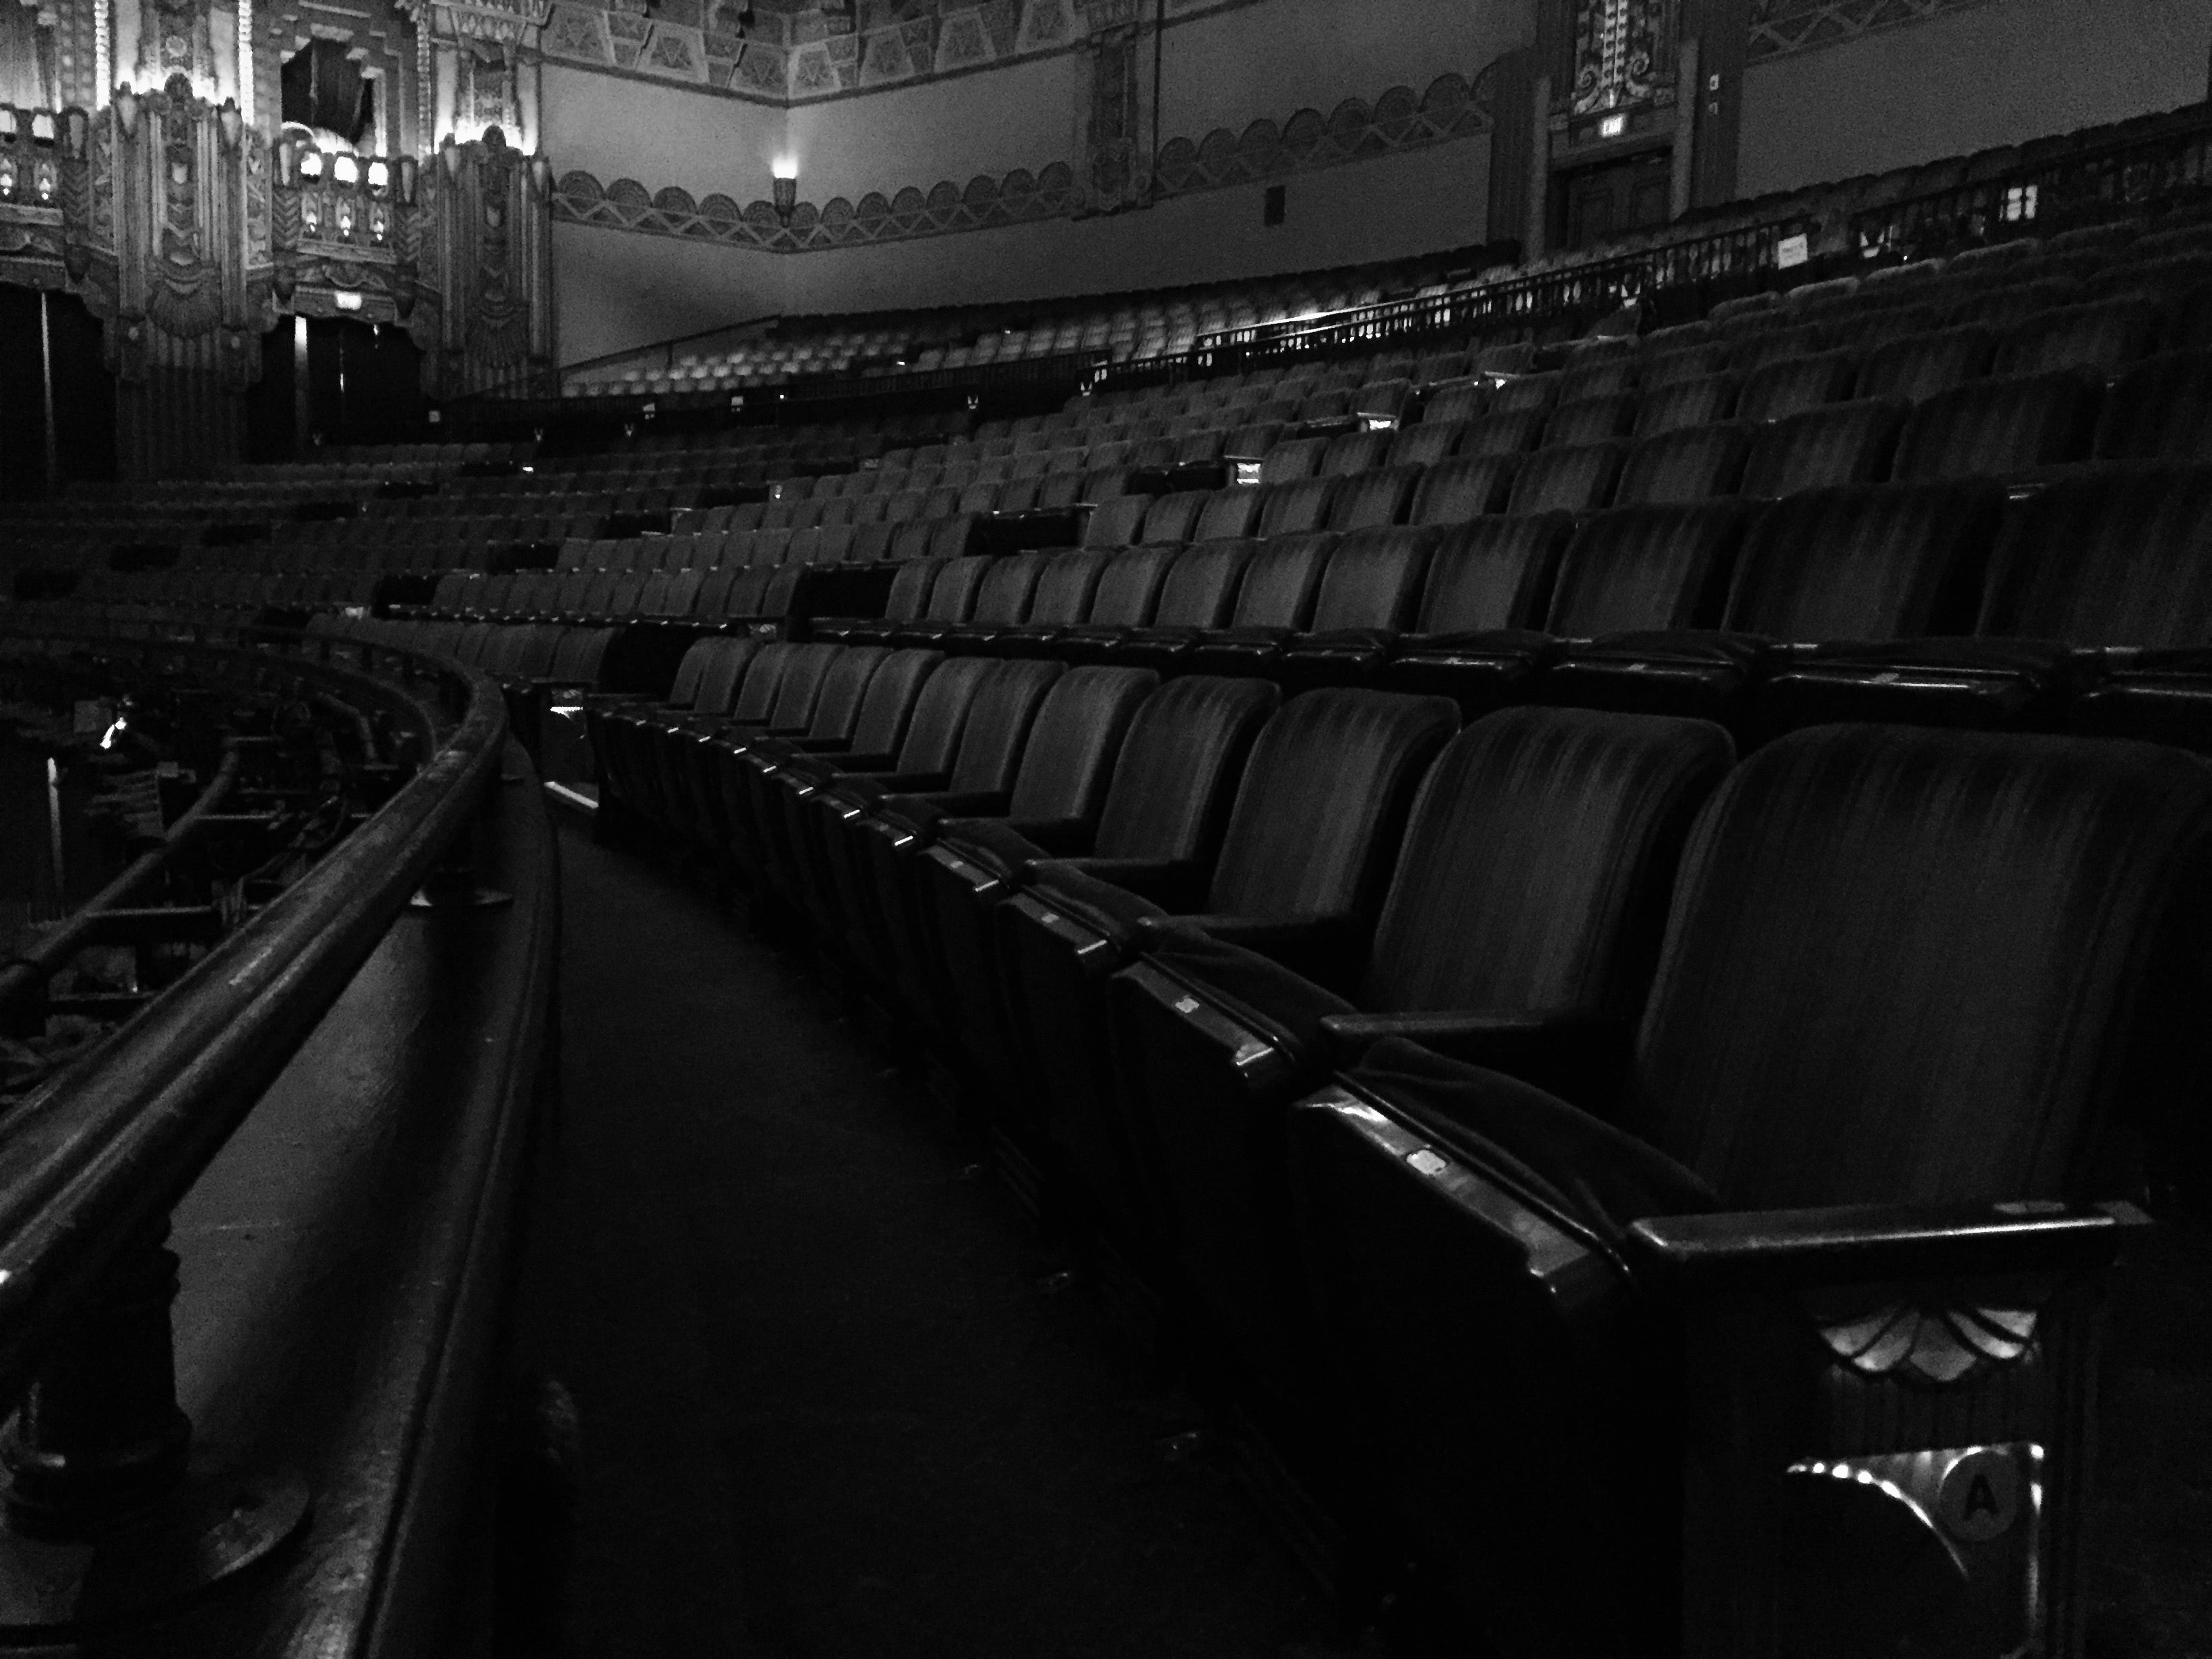 Pantages Theater Seating Chart Mezzanine